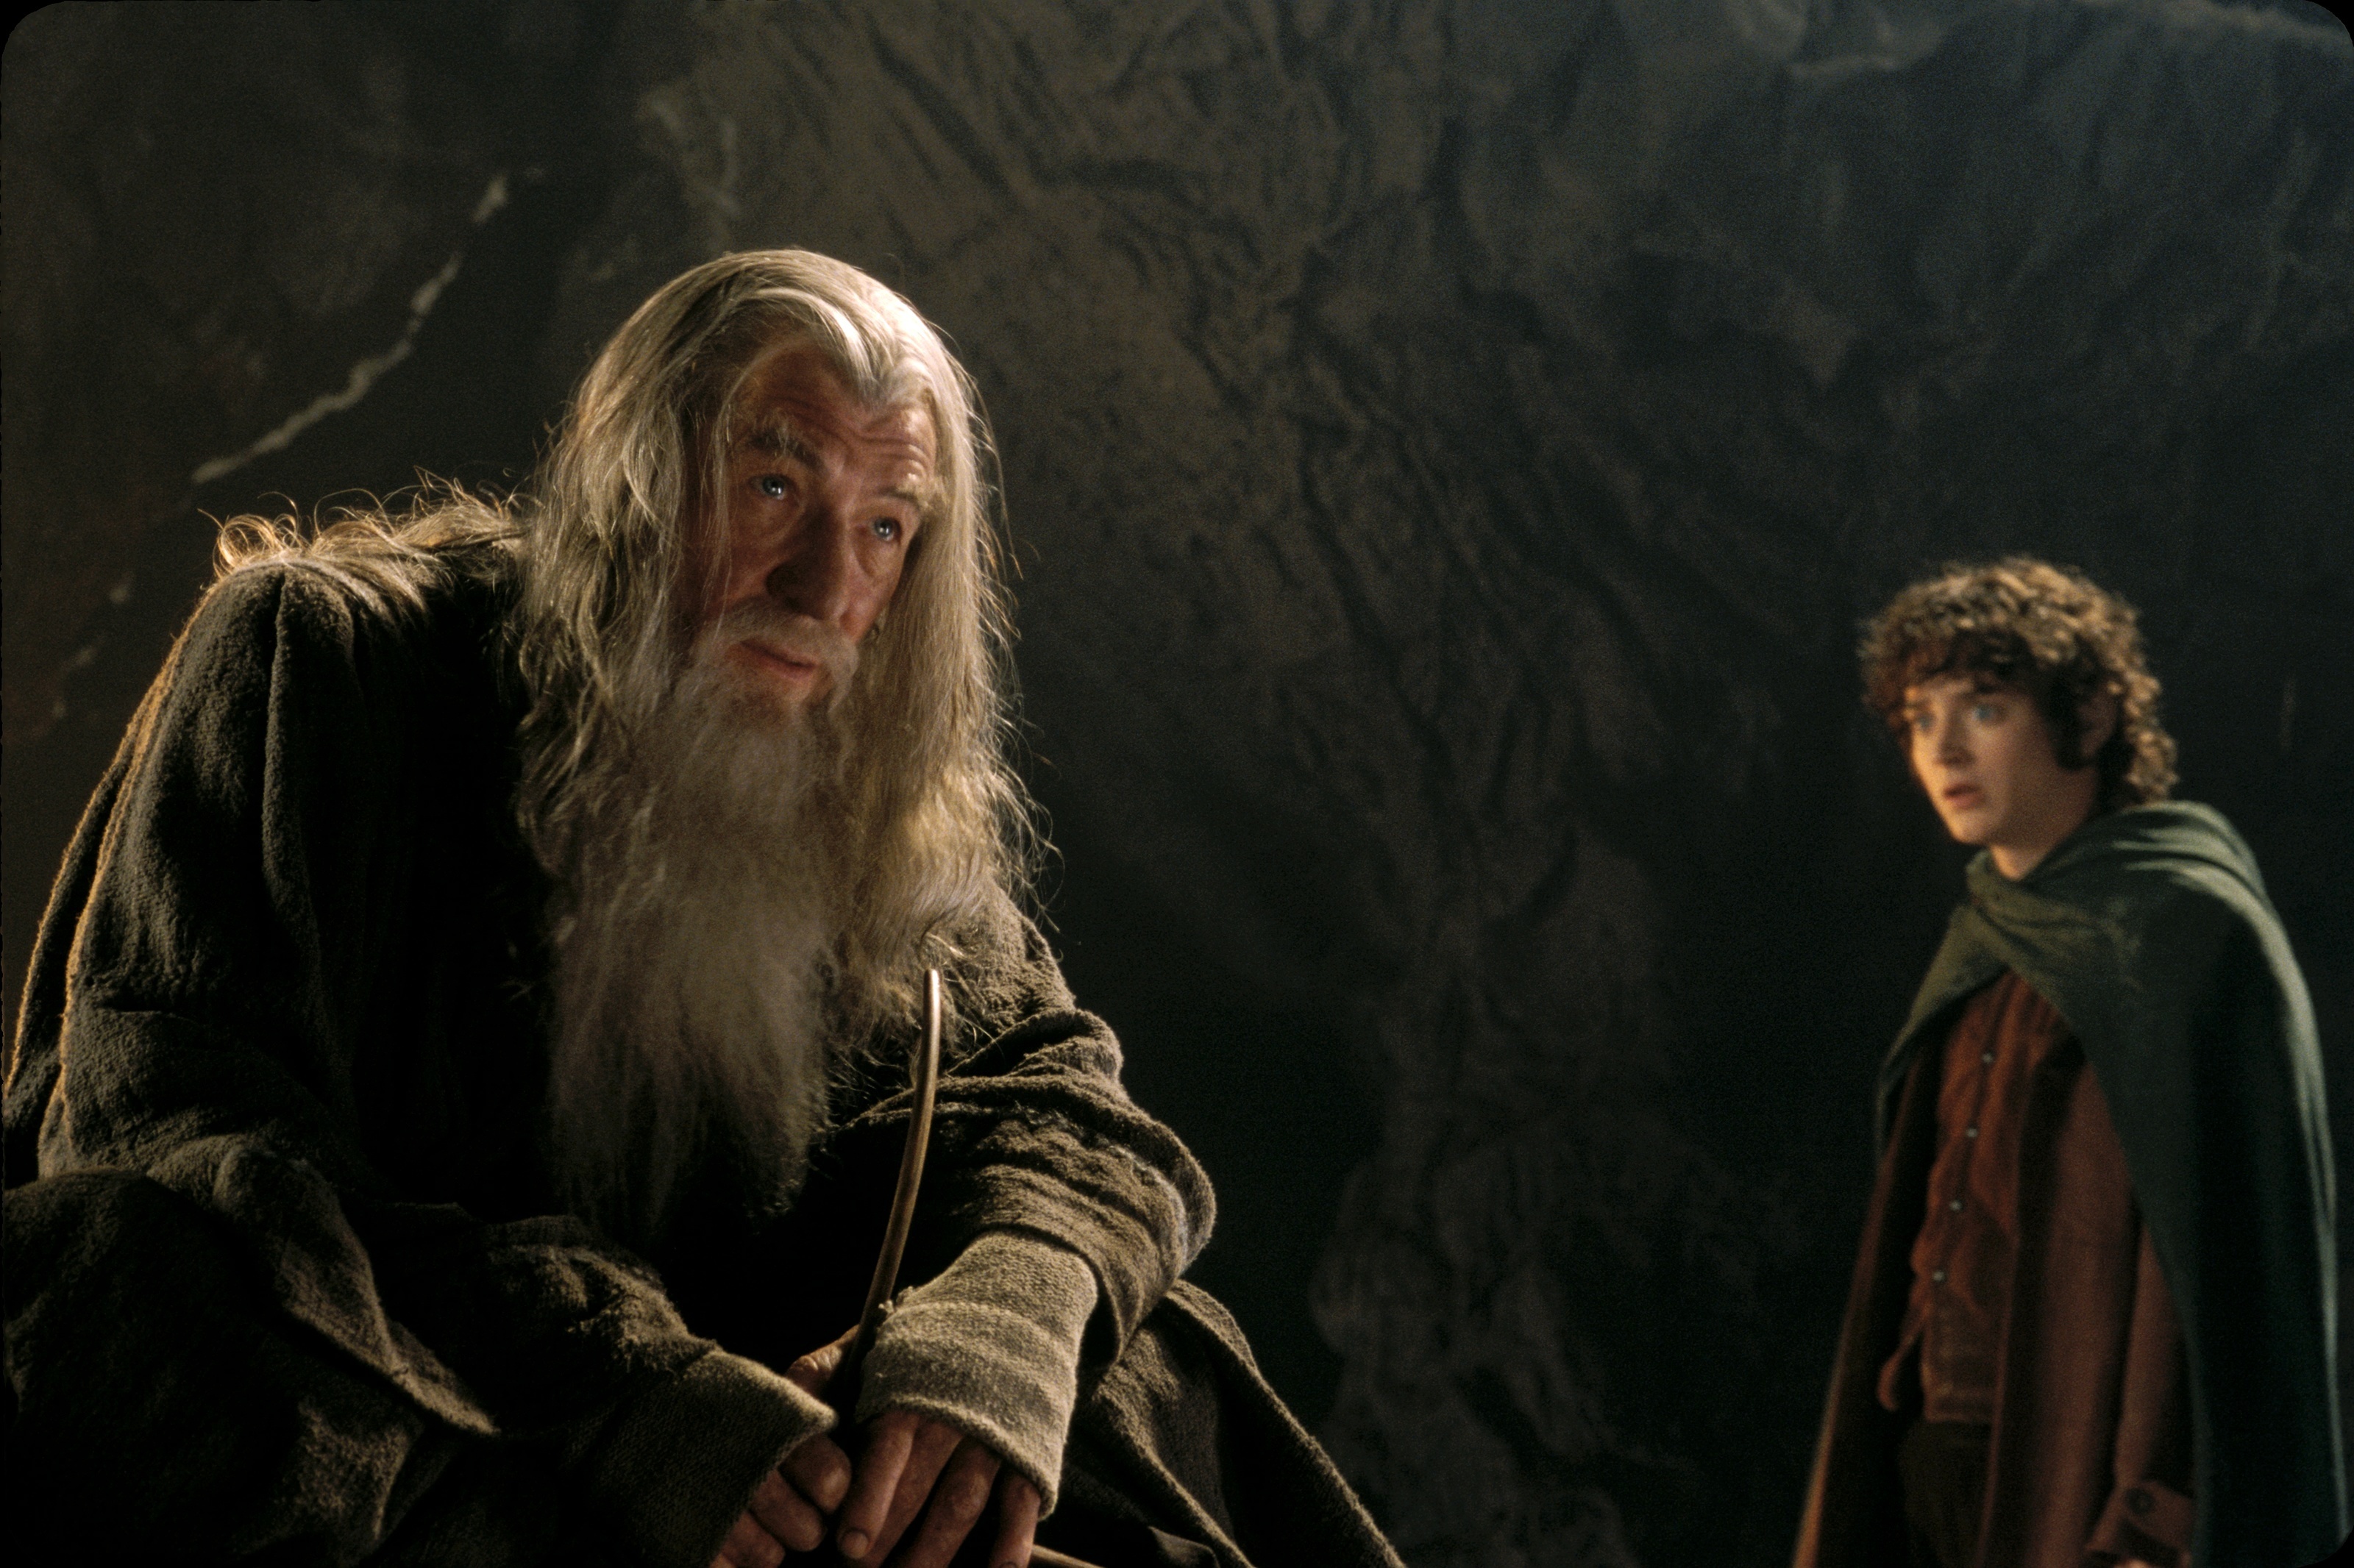 Ian McKellen, Lord of the Rings wallpaper, High-quality image, Epic visuals, 3200x2140 HD Desktop